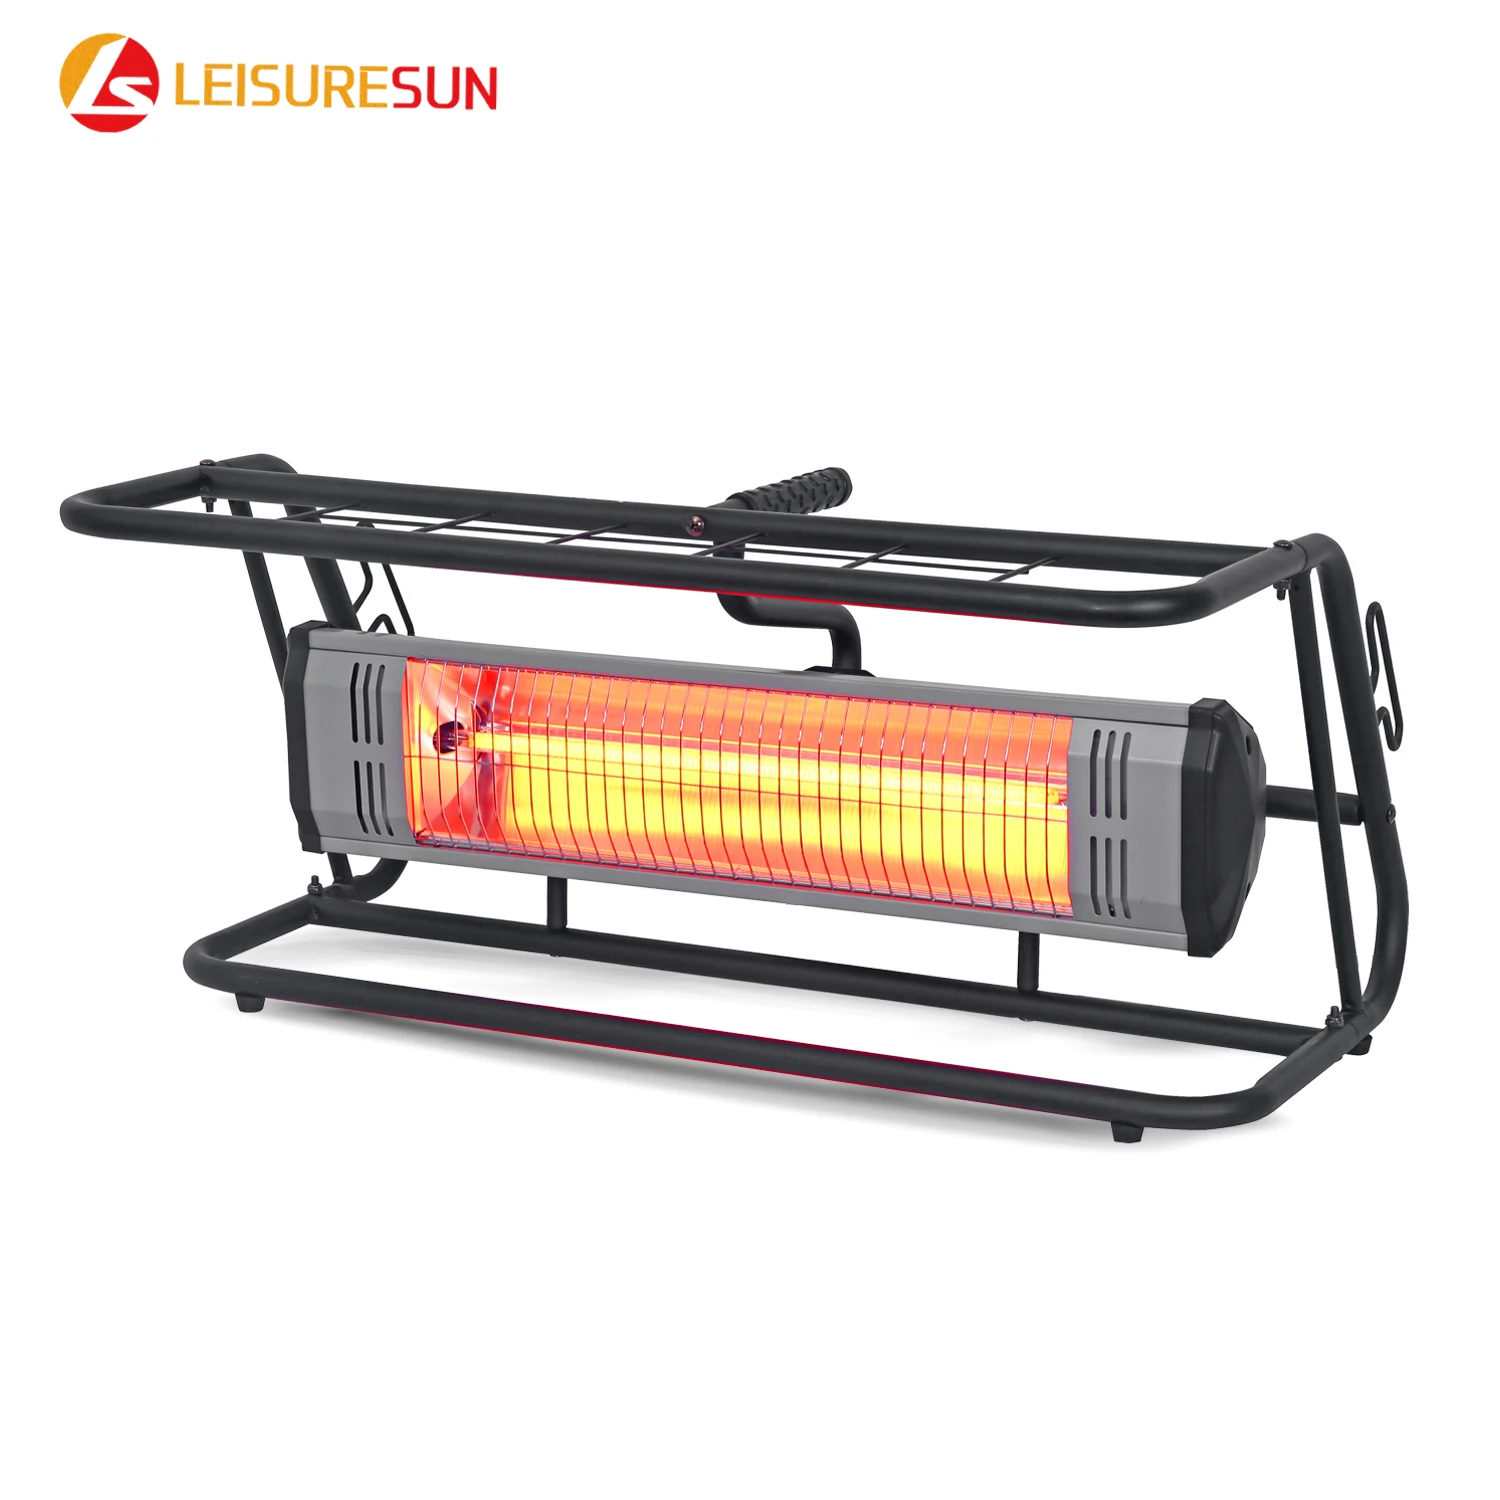 1500W Workspace Radiant infrared heater with portable roll cage (1600658084923)